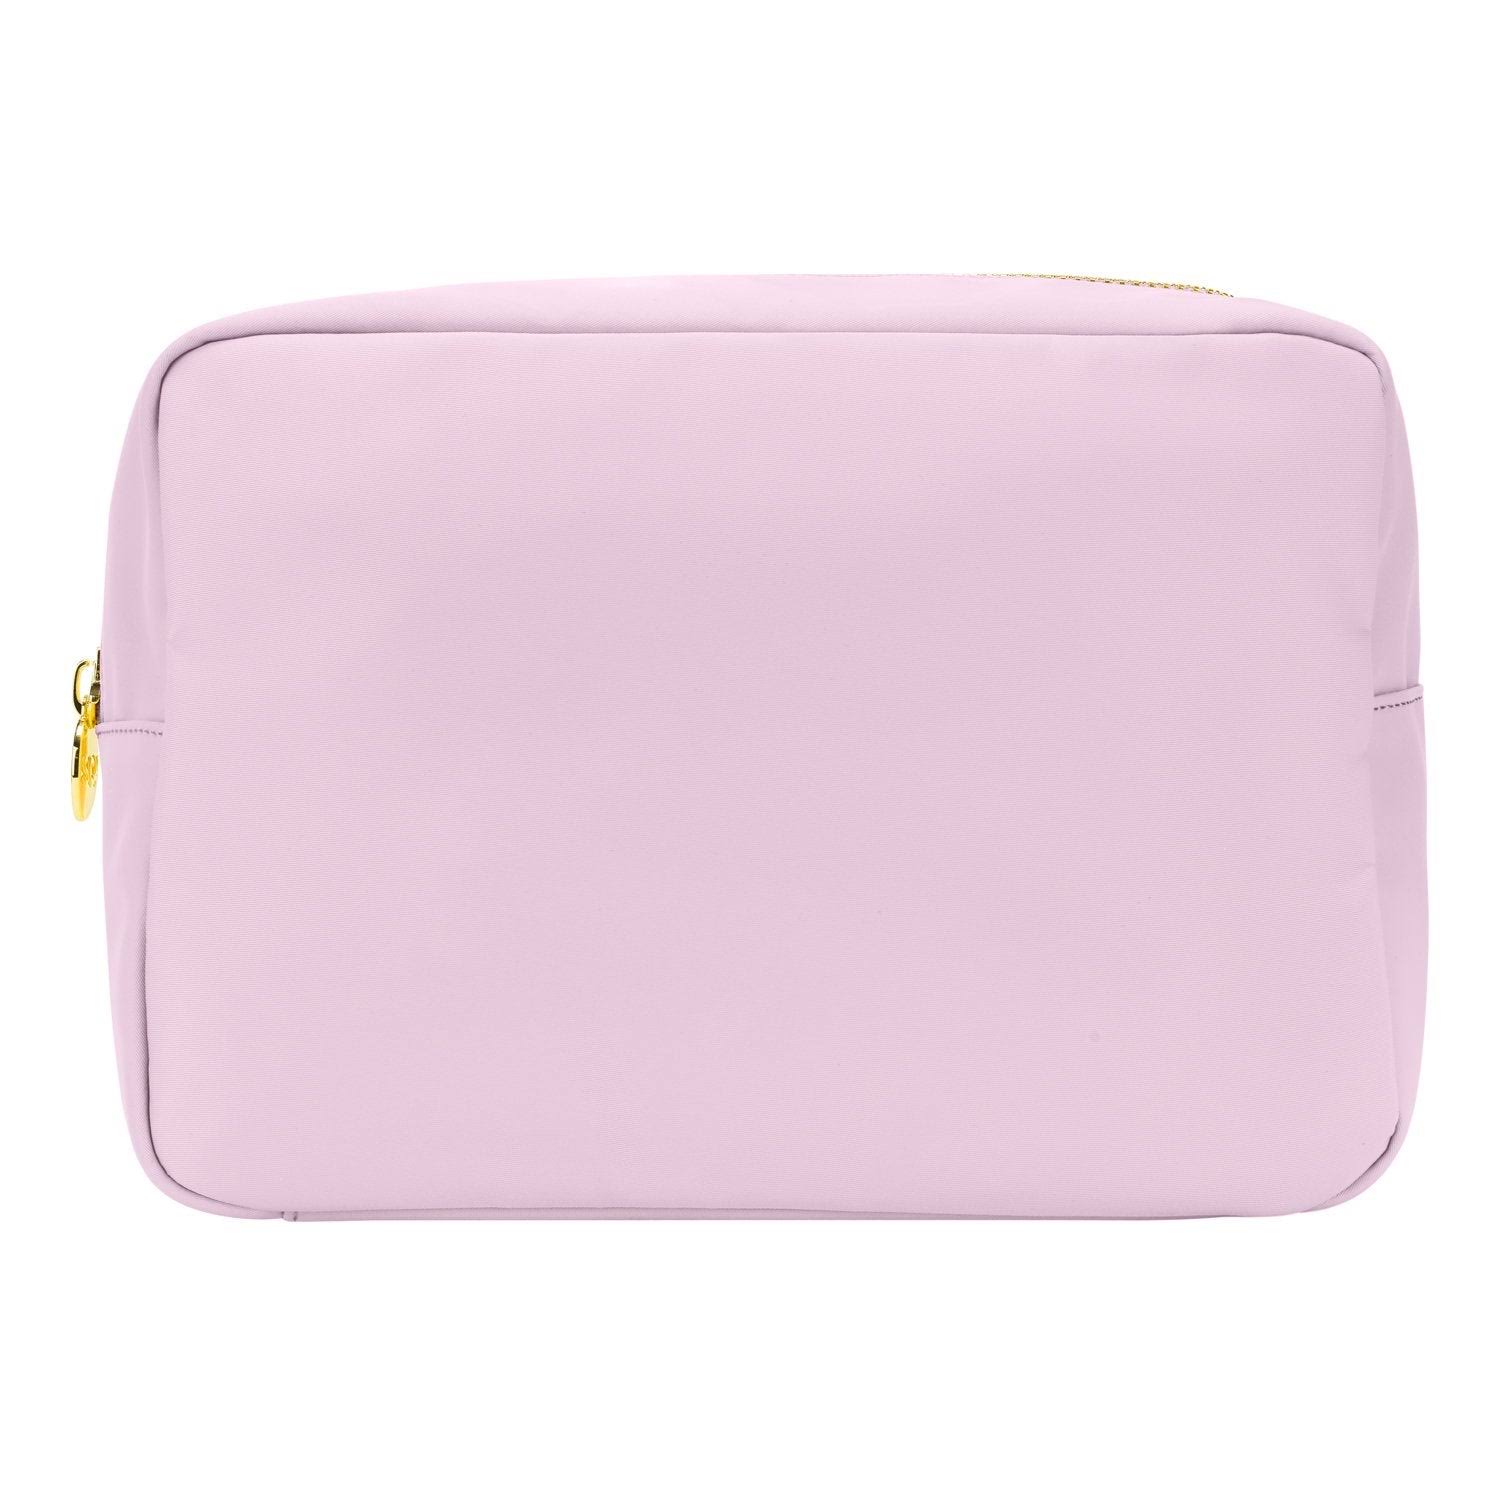 Stoney Clover Lane Classic Large Nylon Pouch - Lilac/Gold